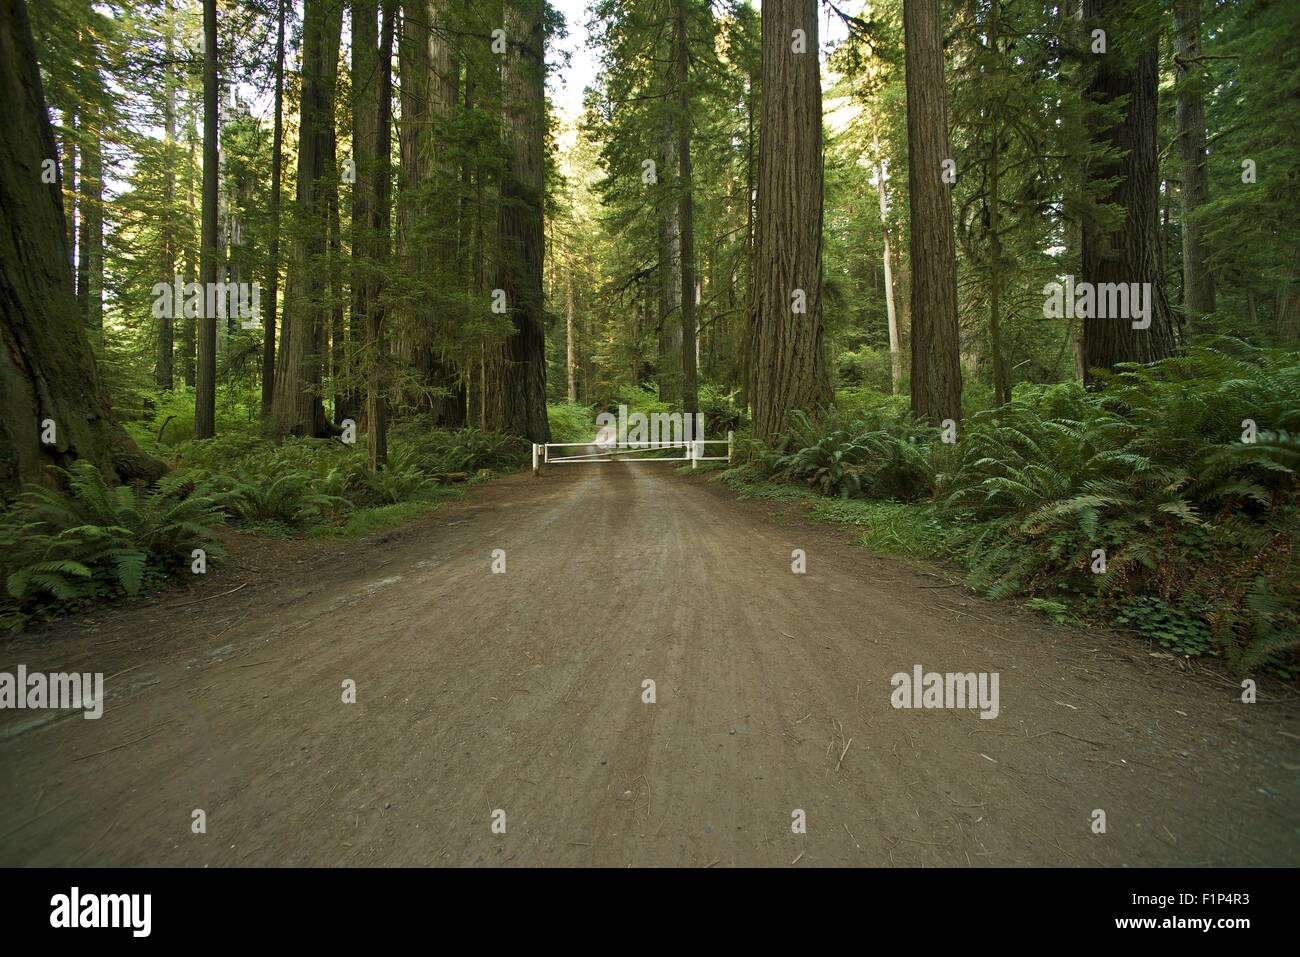 Redwood Forest Road. Redwood Forest National and State Parks Theme. Road Thru Redwoods. Nature Photography Collection. Stock Photo